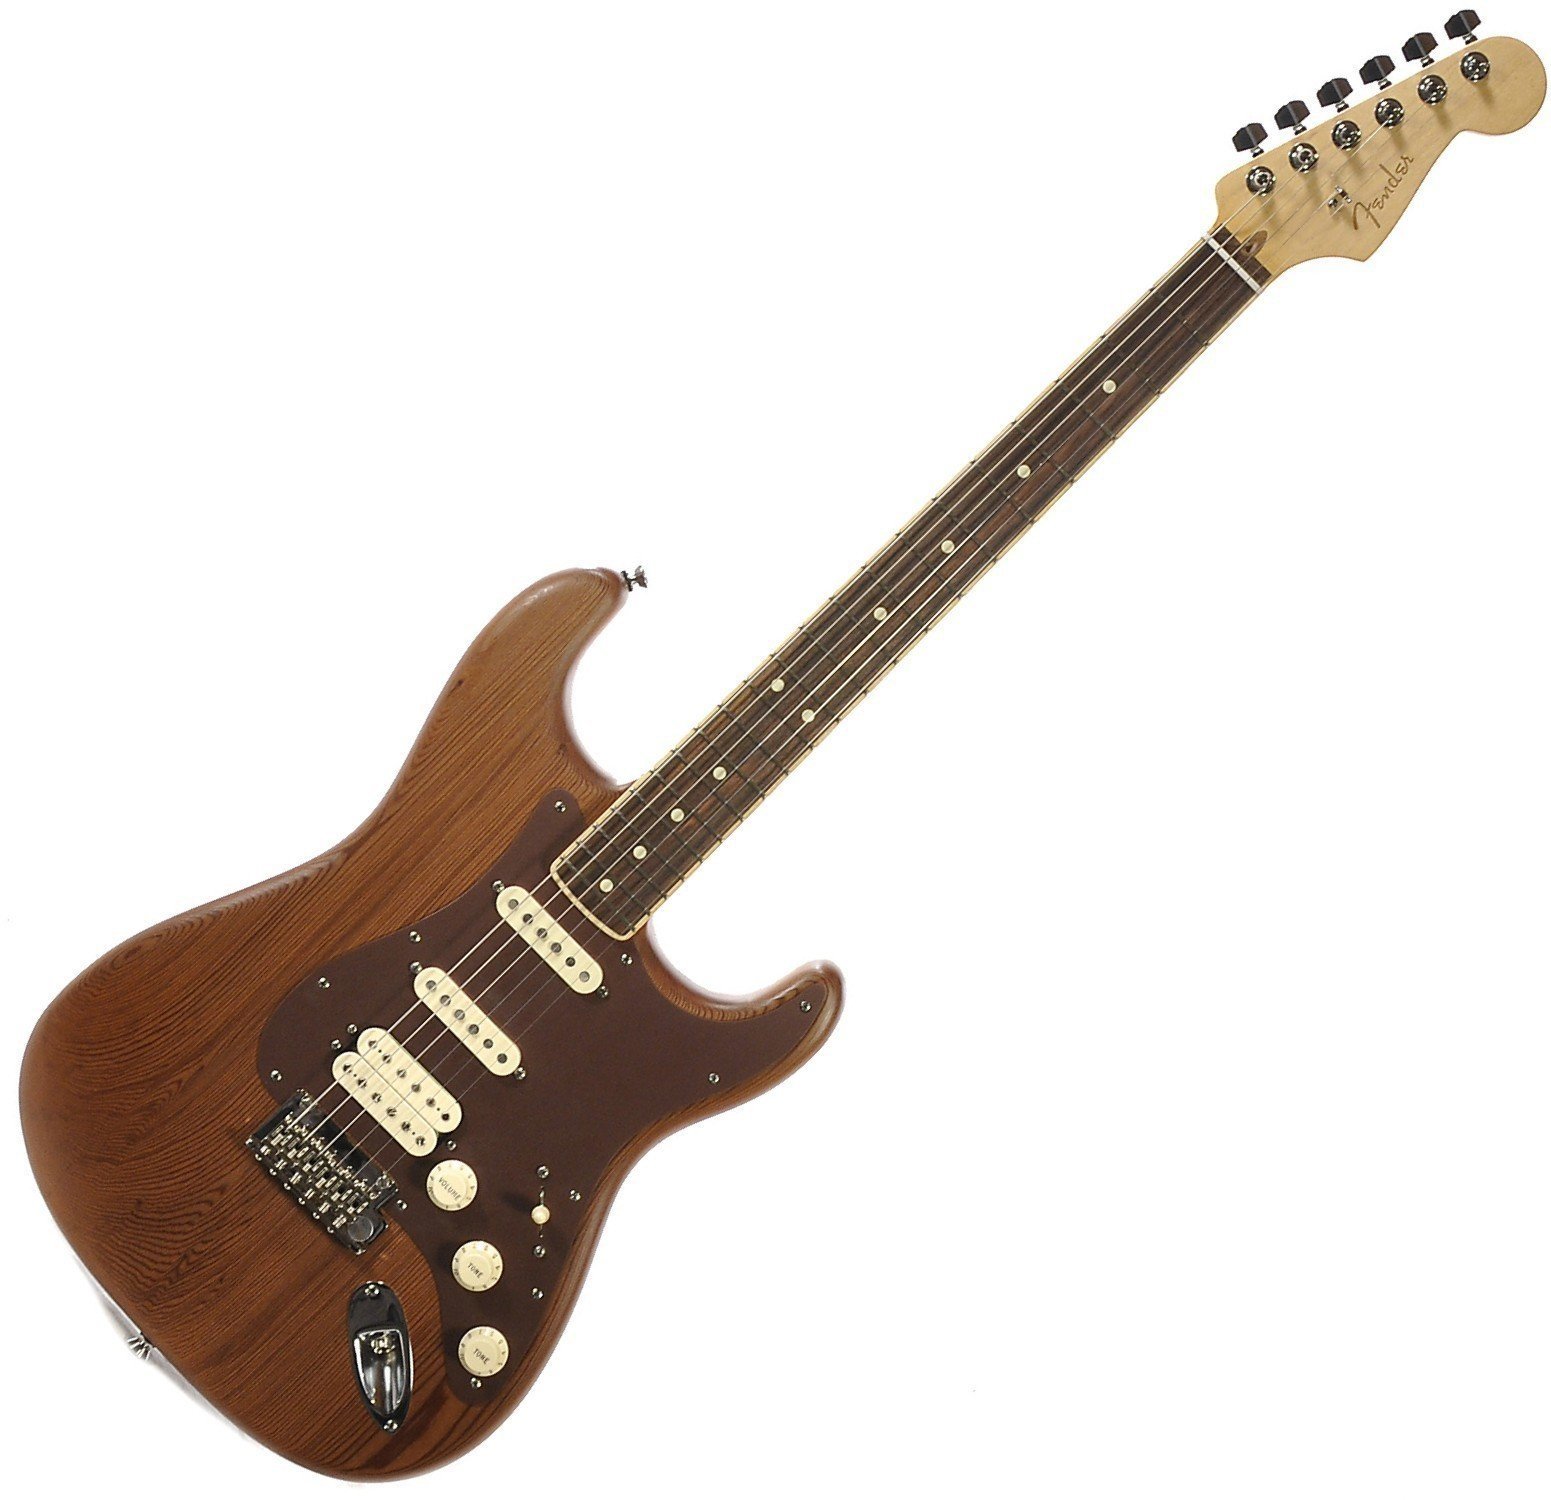 Chitară electrică Fender Reclaimed Old Growth Redwood Stratocaster